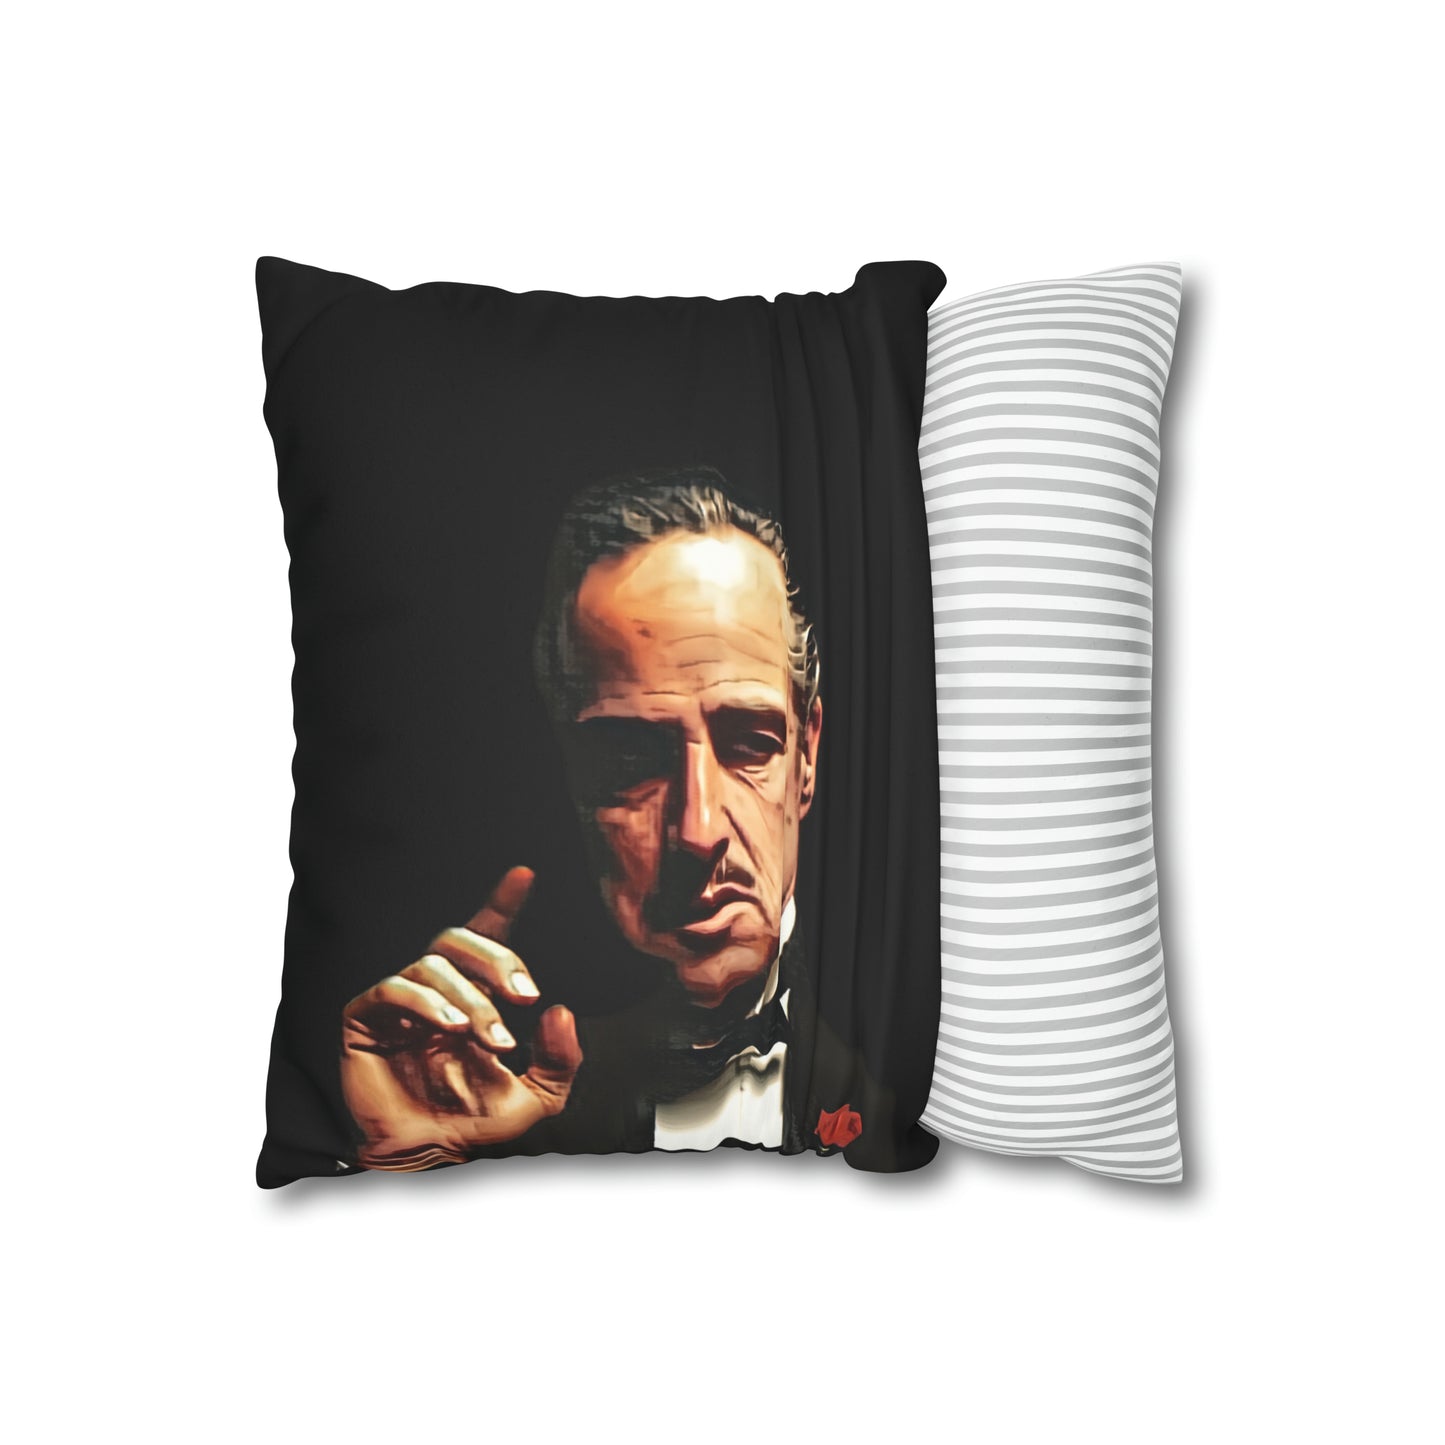 Godfather Gift, Mafia Gift, Movie Lover, Cinephile, Cosplay, Throw Pillar Cover